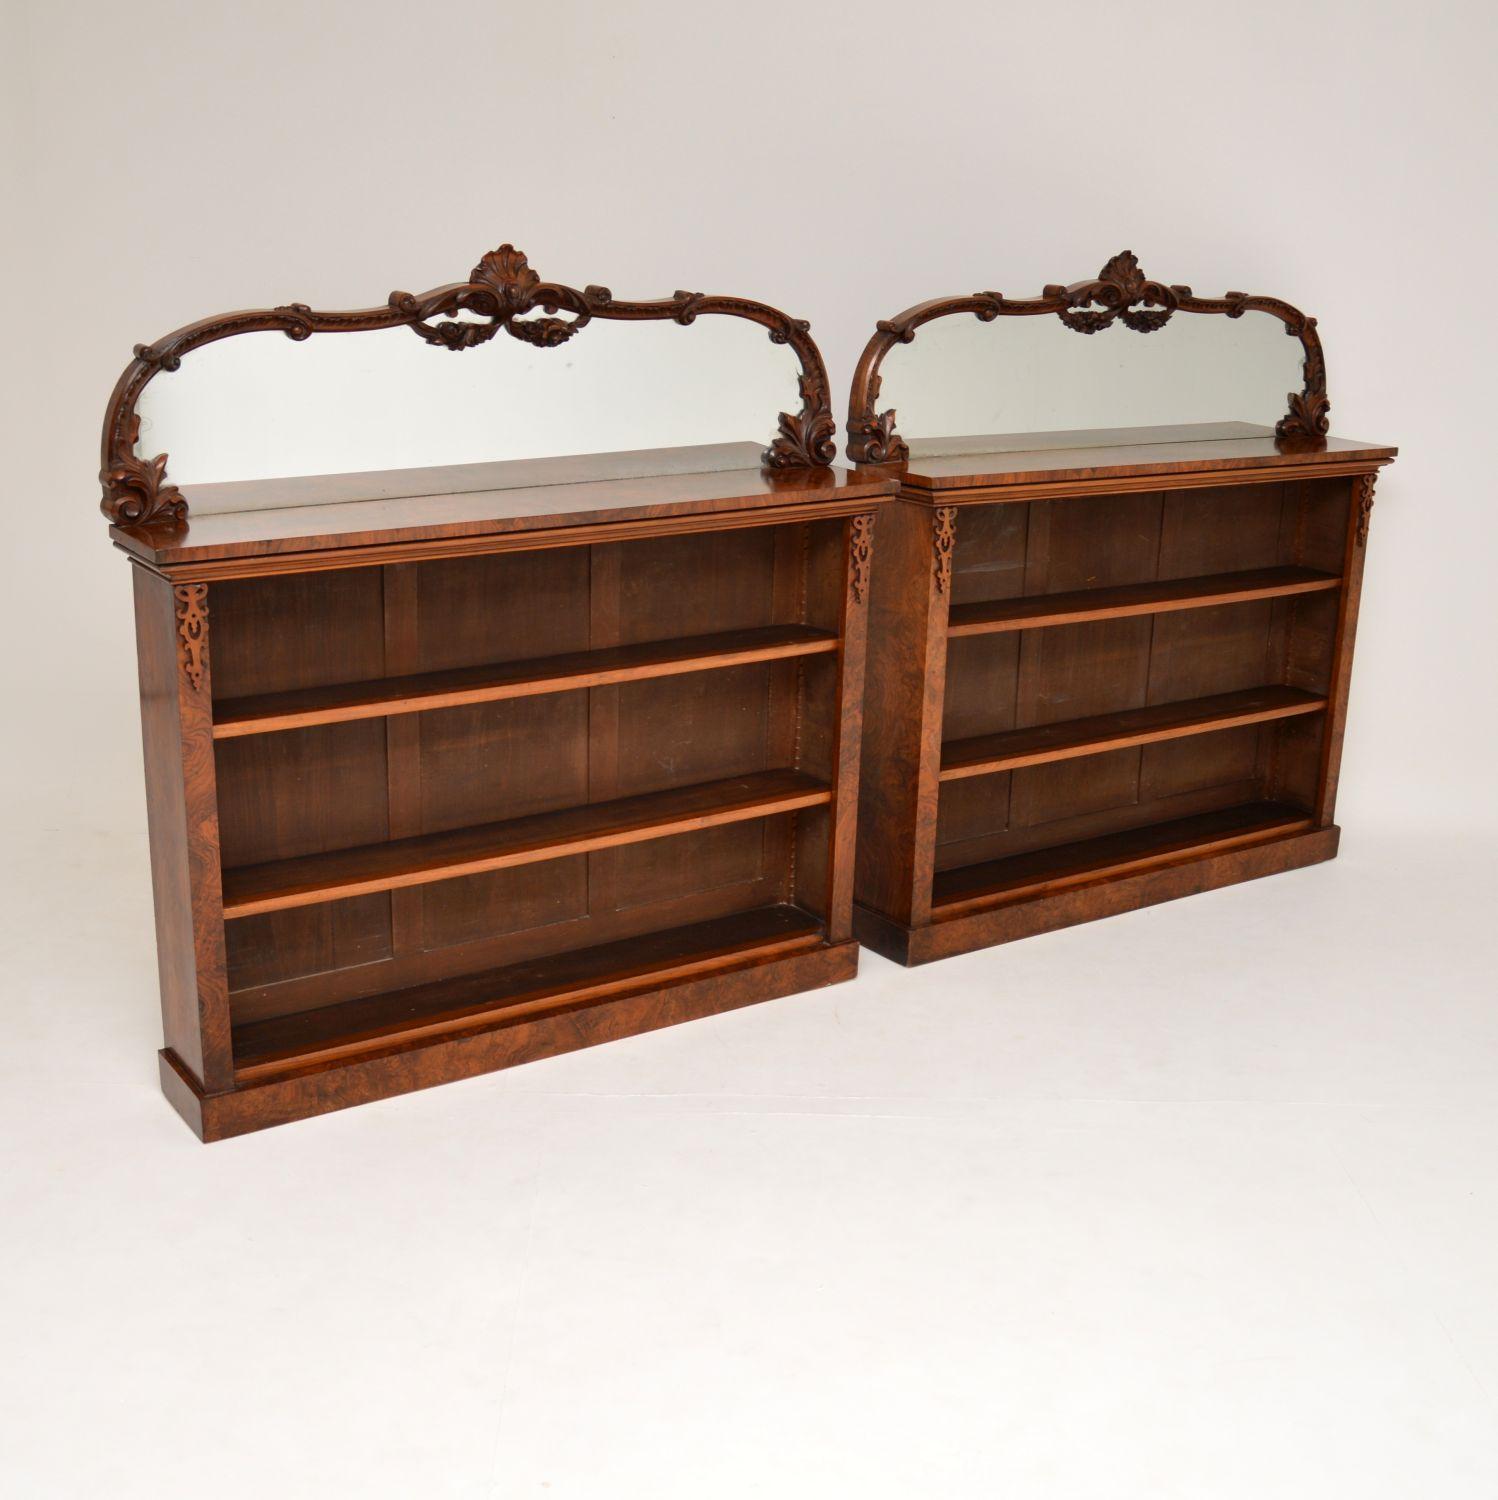 Stunning & rare pair of antique early Victorian burr walnut open bookcases with original mirrored backs. They are in excellent original condition & date from around the 1860-70’s period.

One on it’s own would be very nice, but to find a pair with